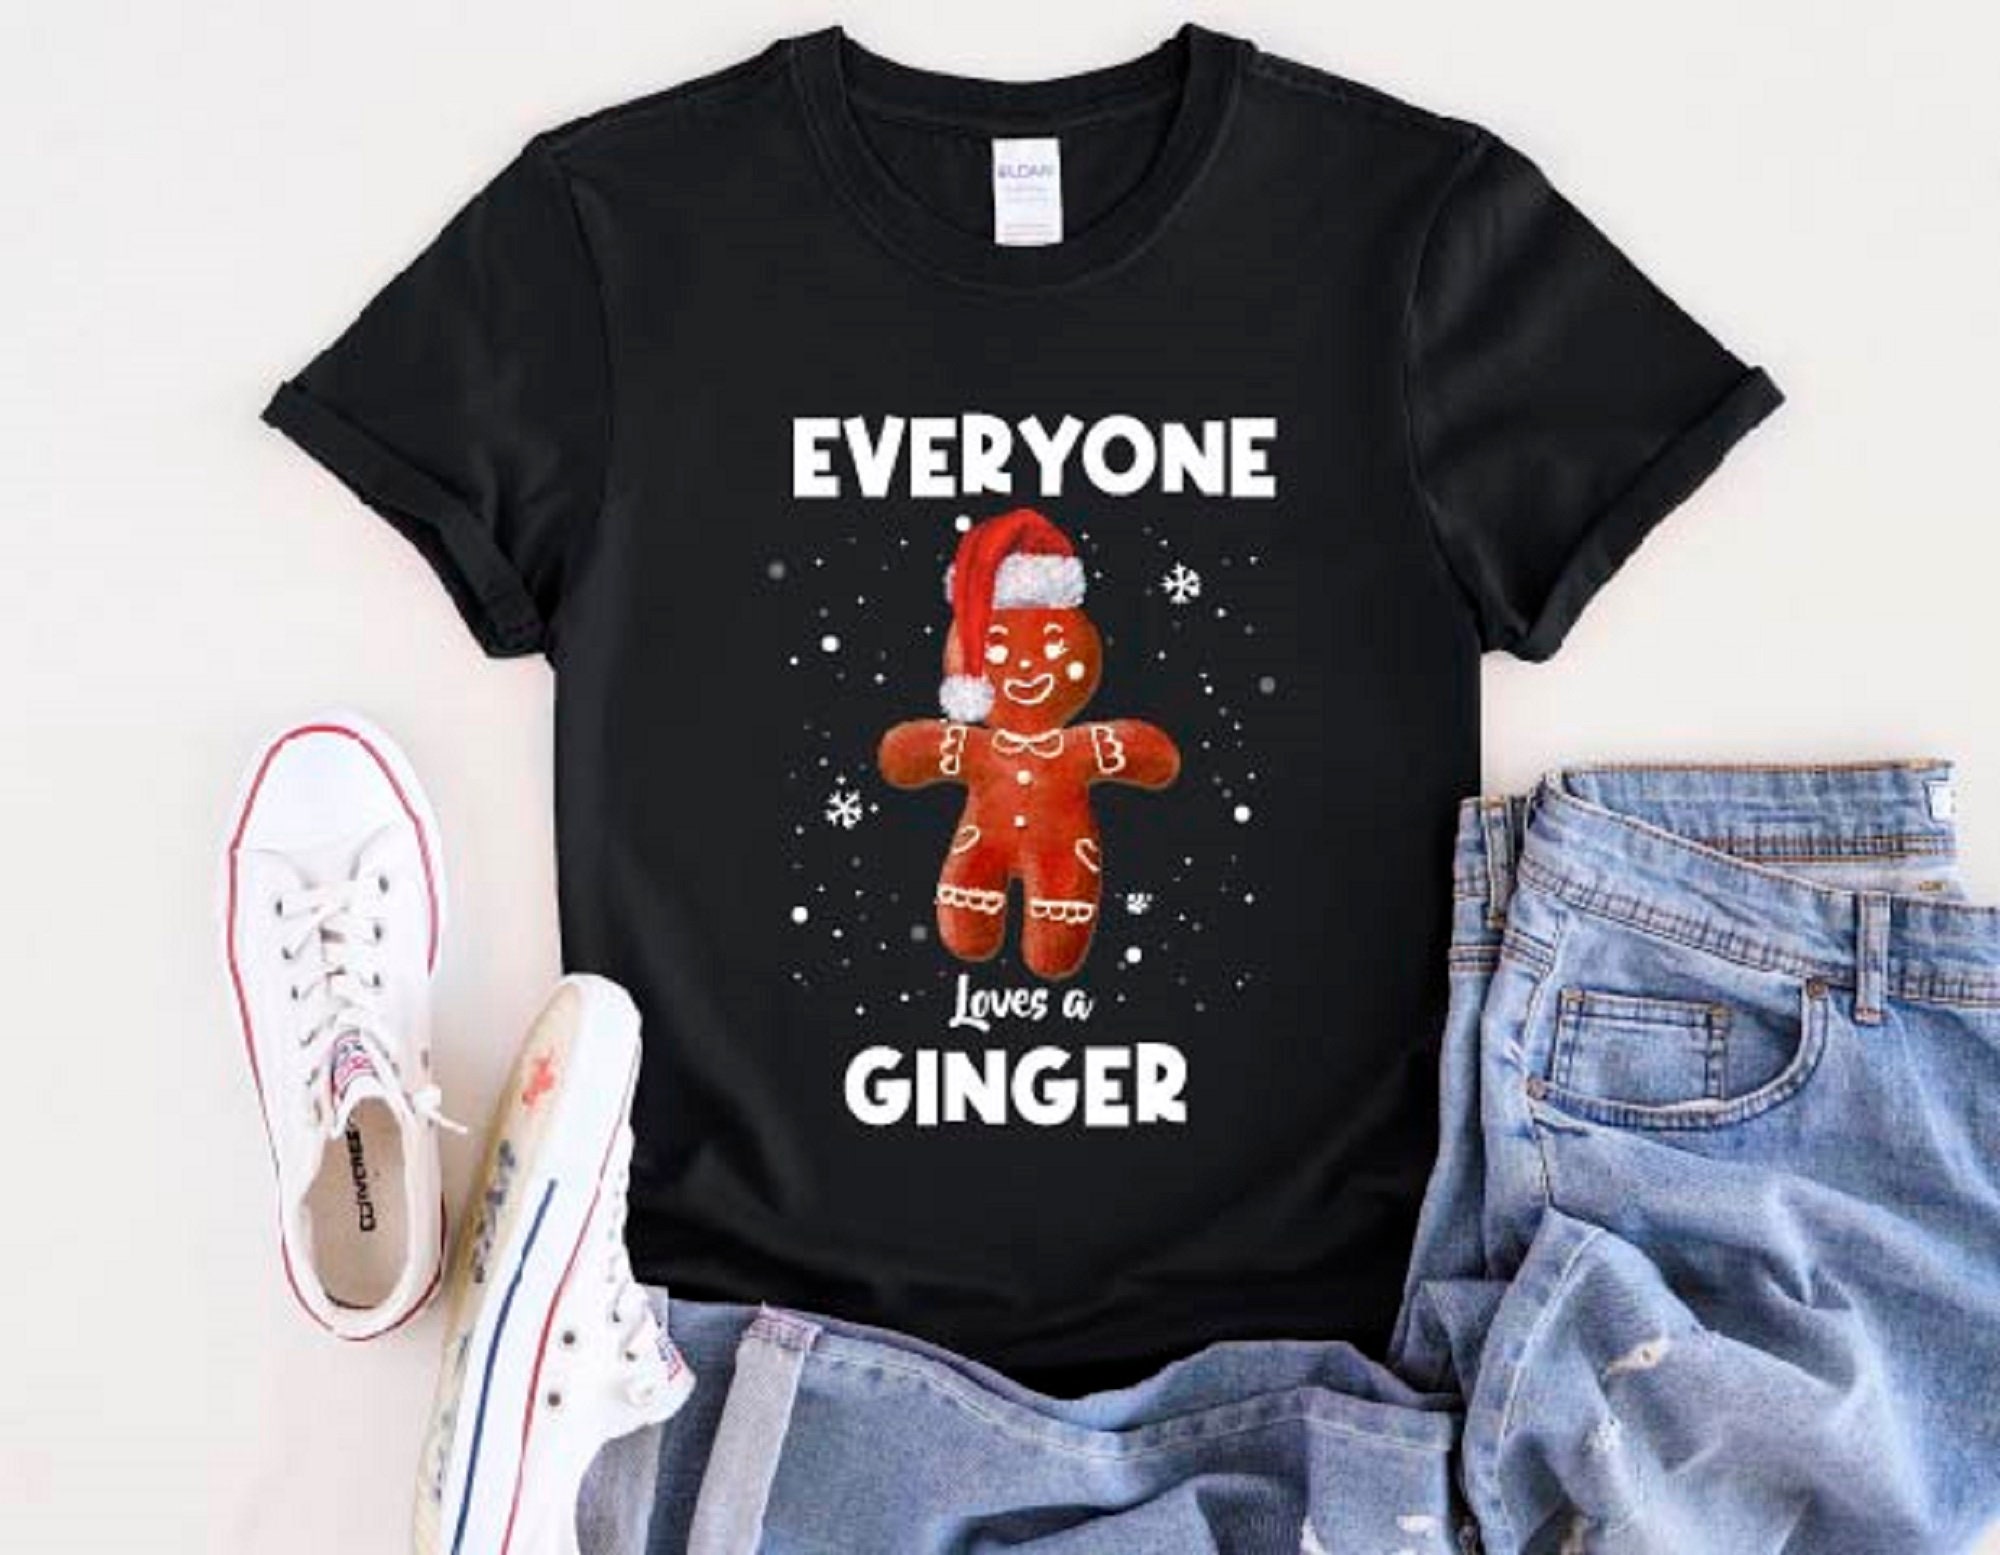 Discover Everyone Loves A Ginger Shirt, Funny Christmas Gingerbread Tee